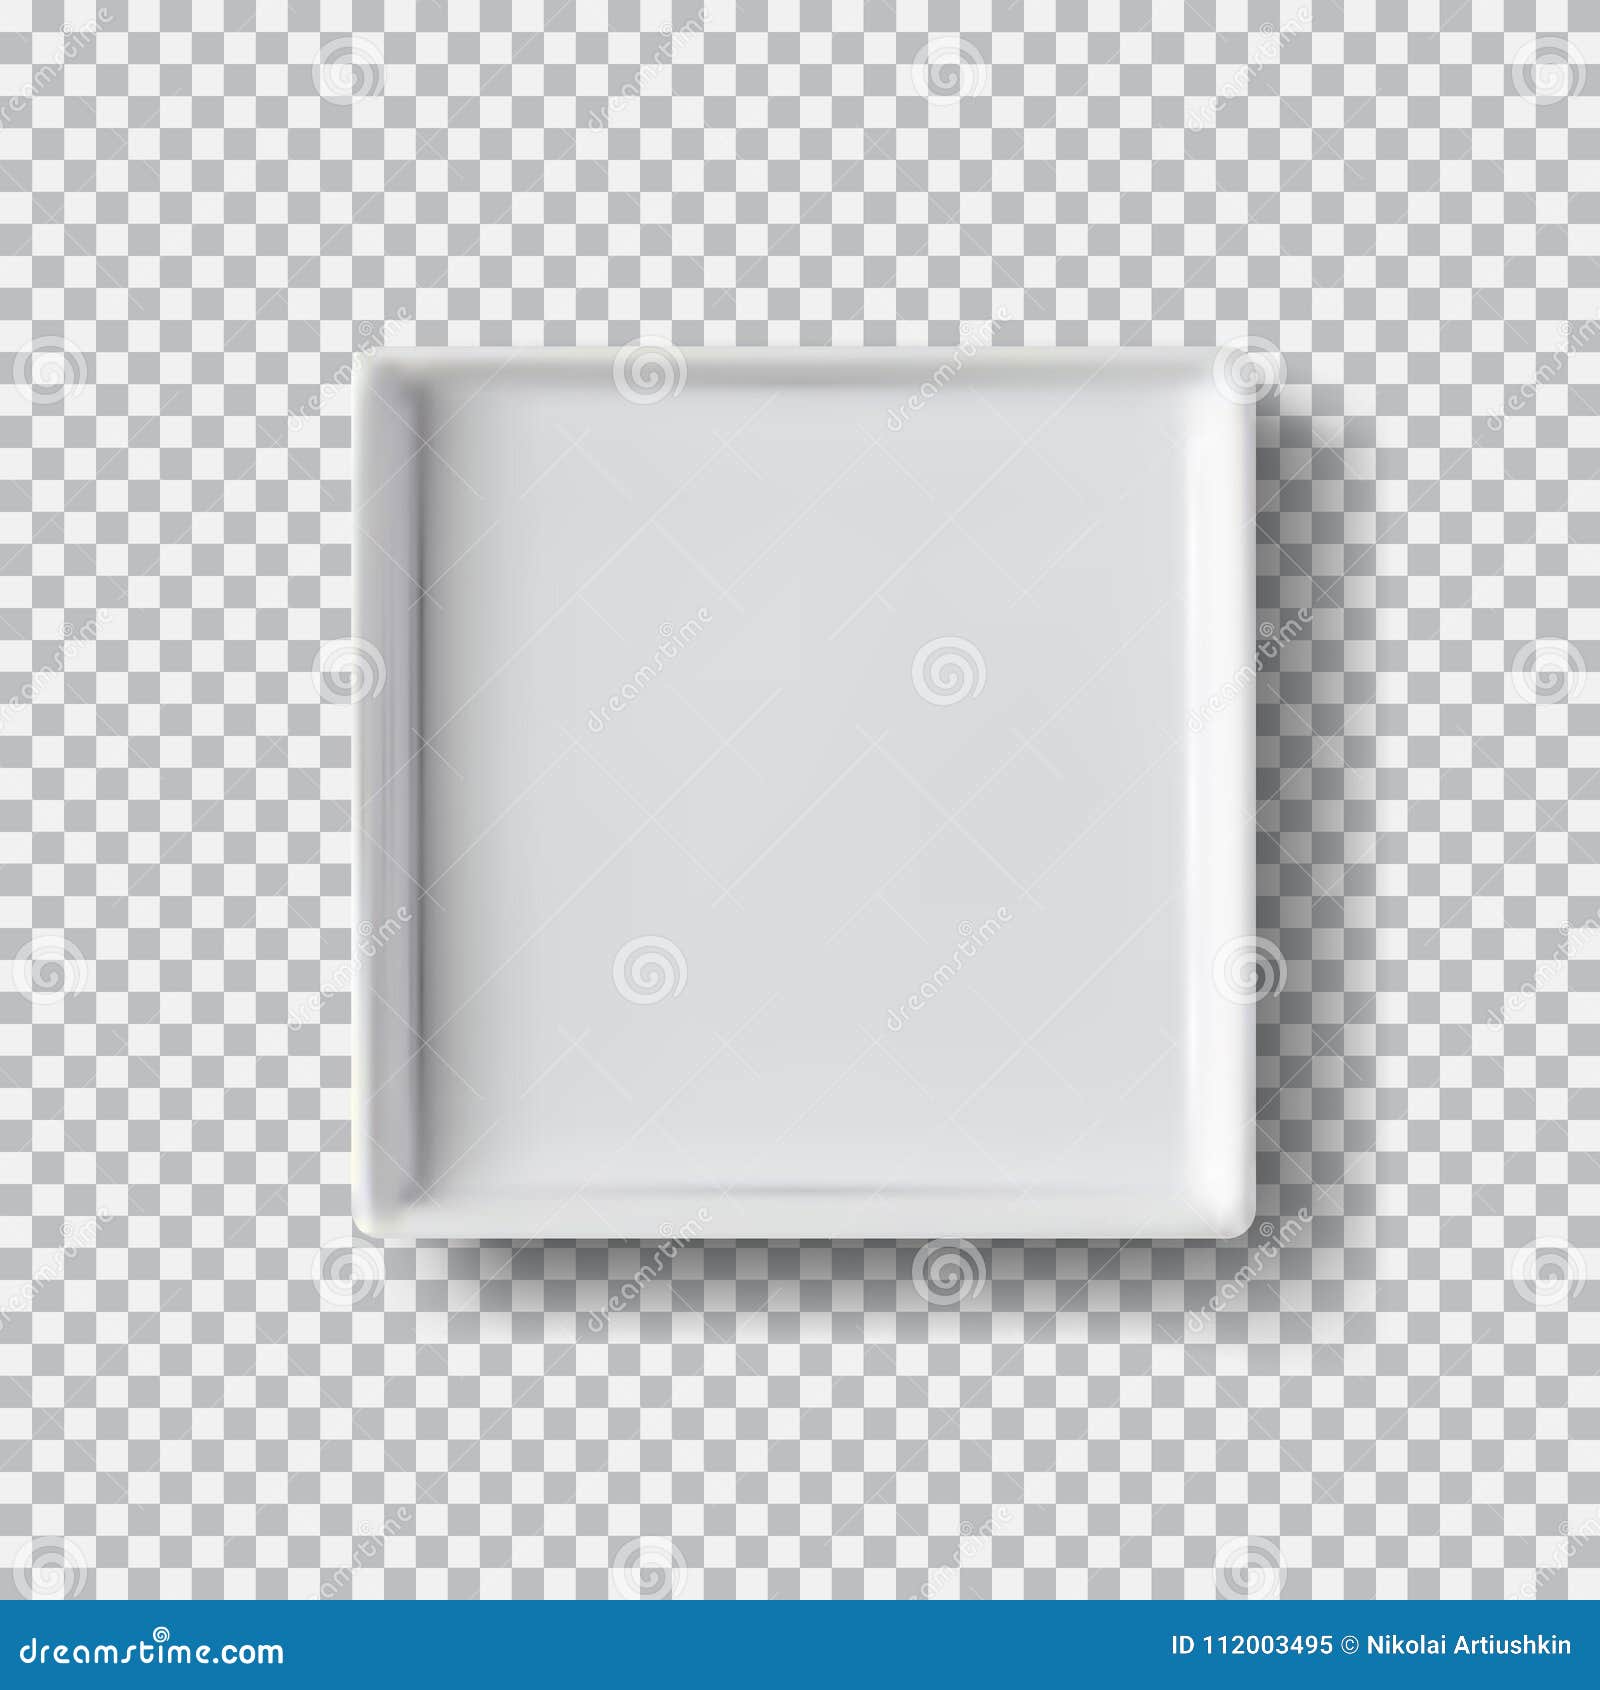 Download White Plate On Transparent Background. White Box Mock Up ...